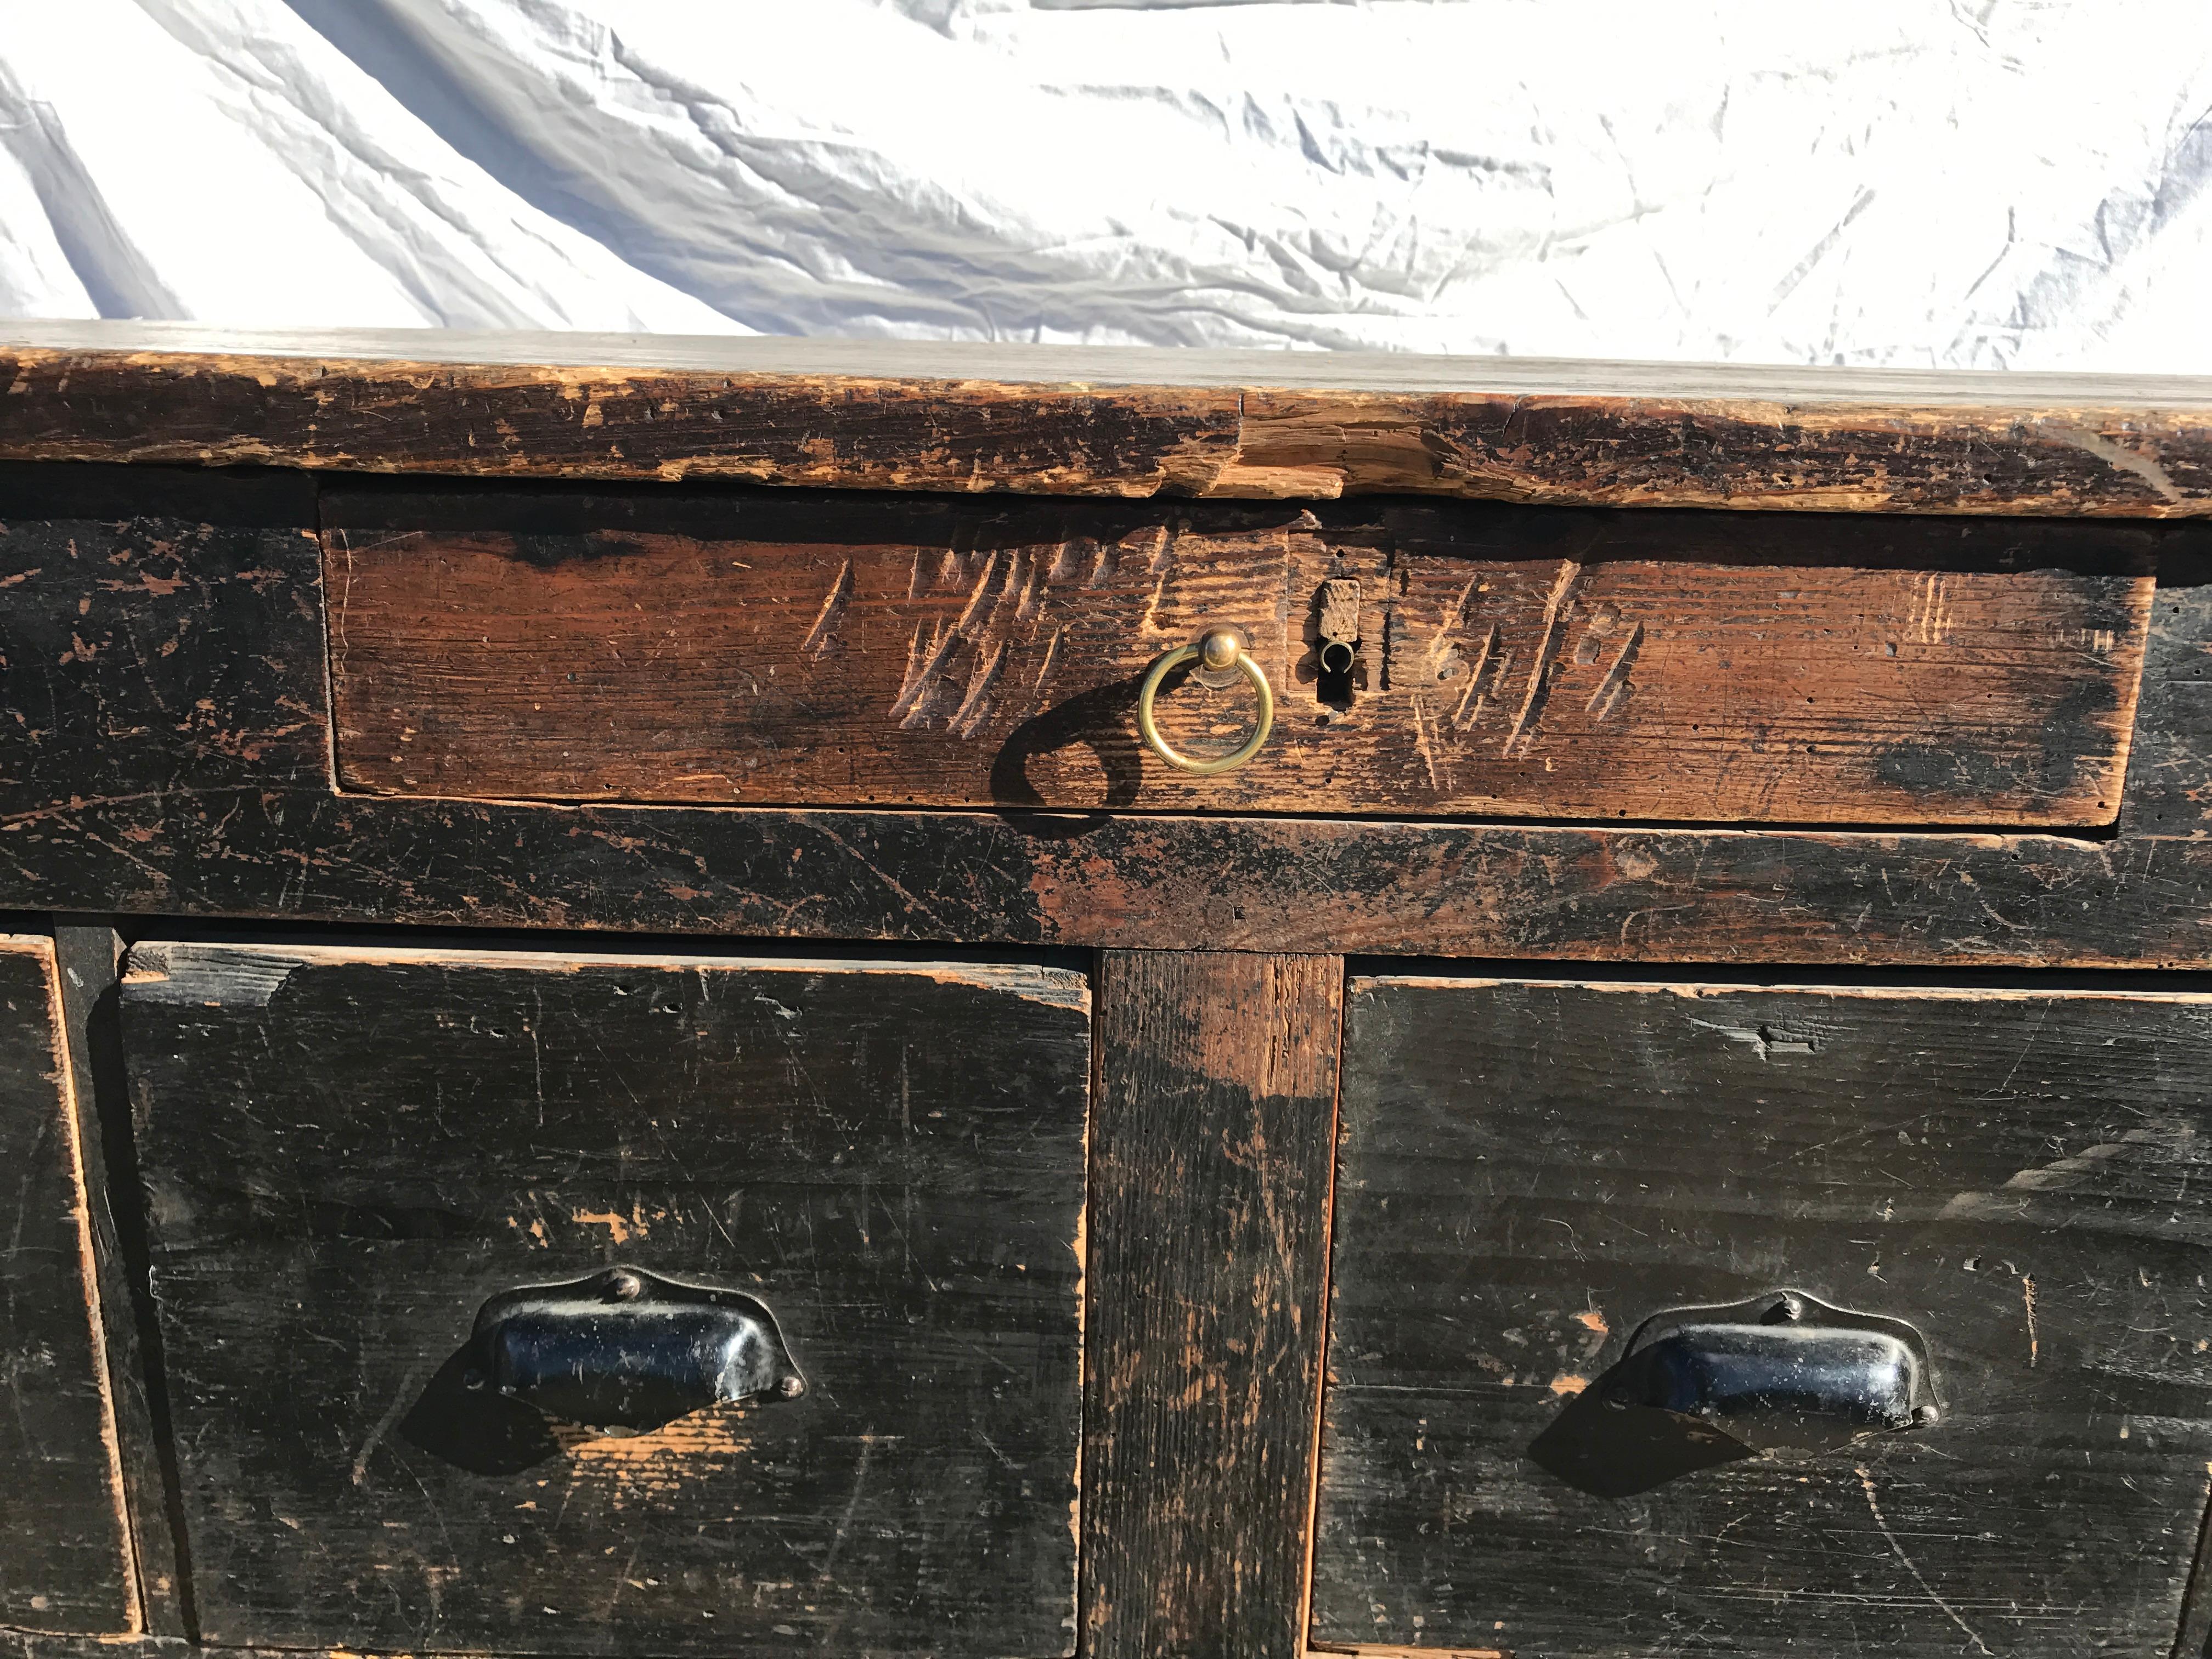 Vintage case piece with drawers; suitable for dresser, office and desk storage, or rustic sideboard.

Please inquire for condition specifics; fantastic patina, sturdy construction, and functional drawers.